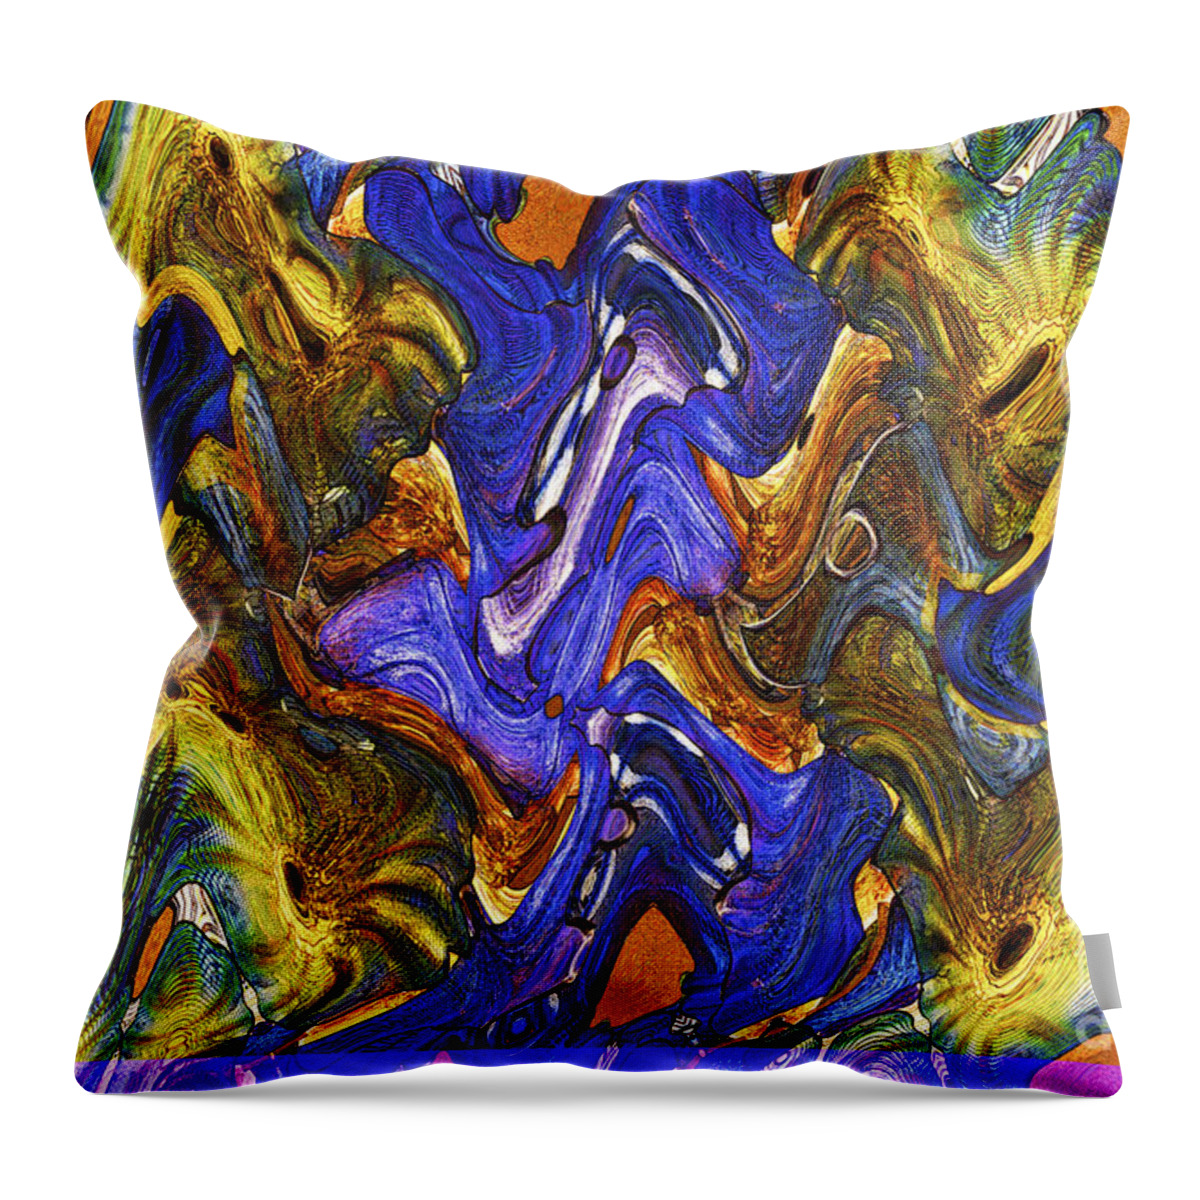 Abstract Throw Pillow featuring the digital art Shapes 6 by Michael Anthony